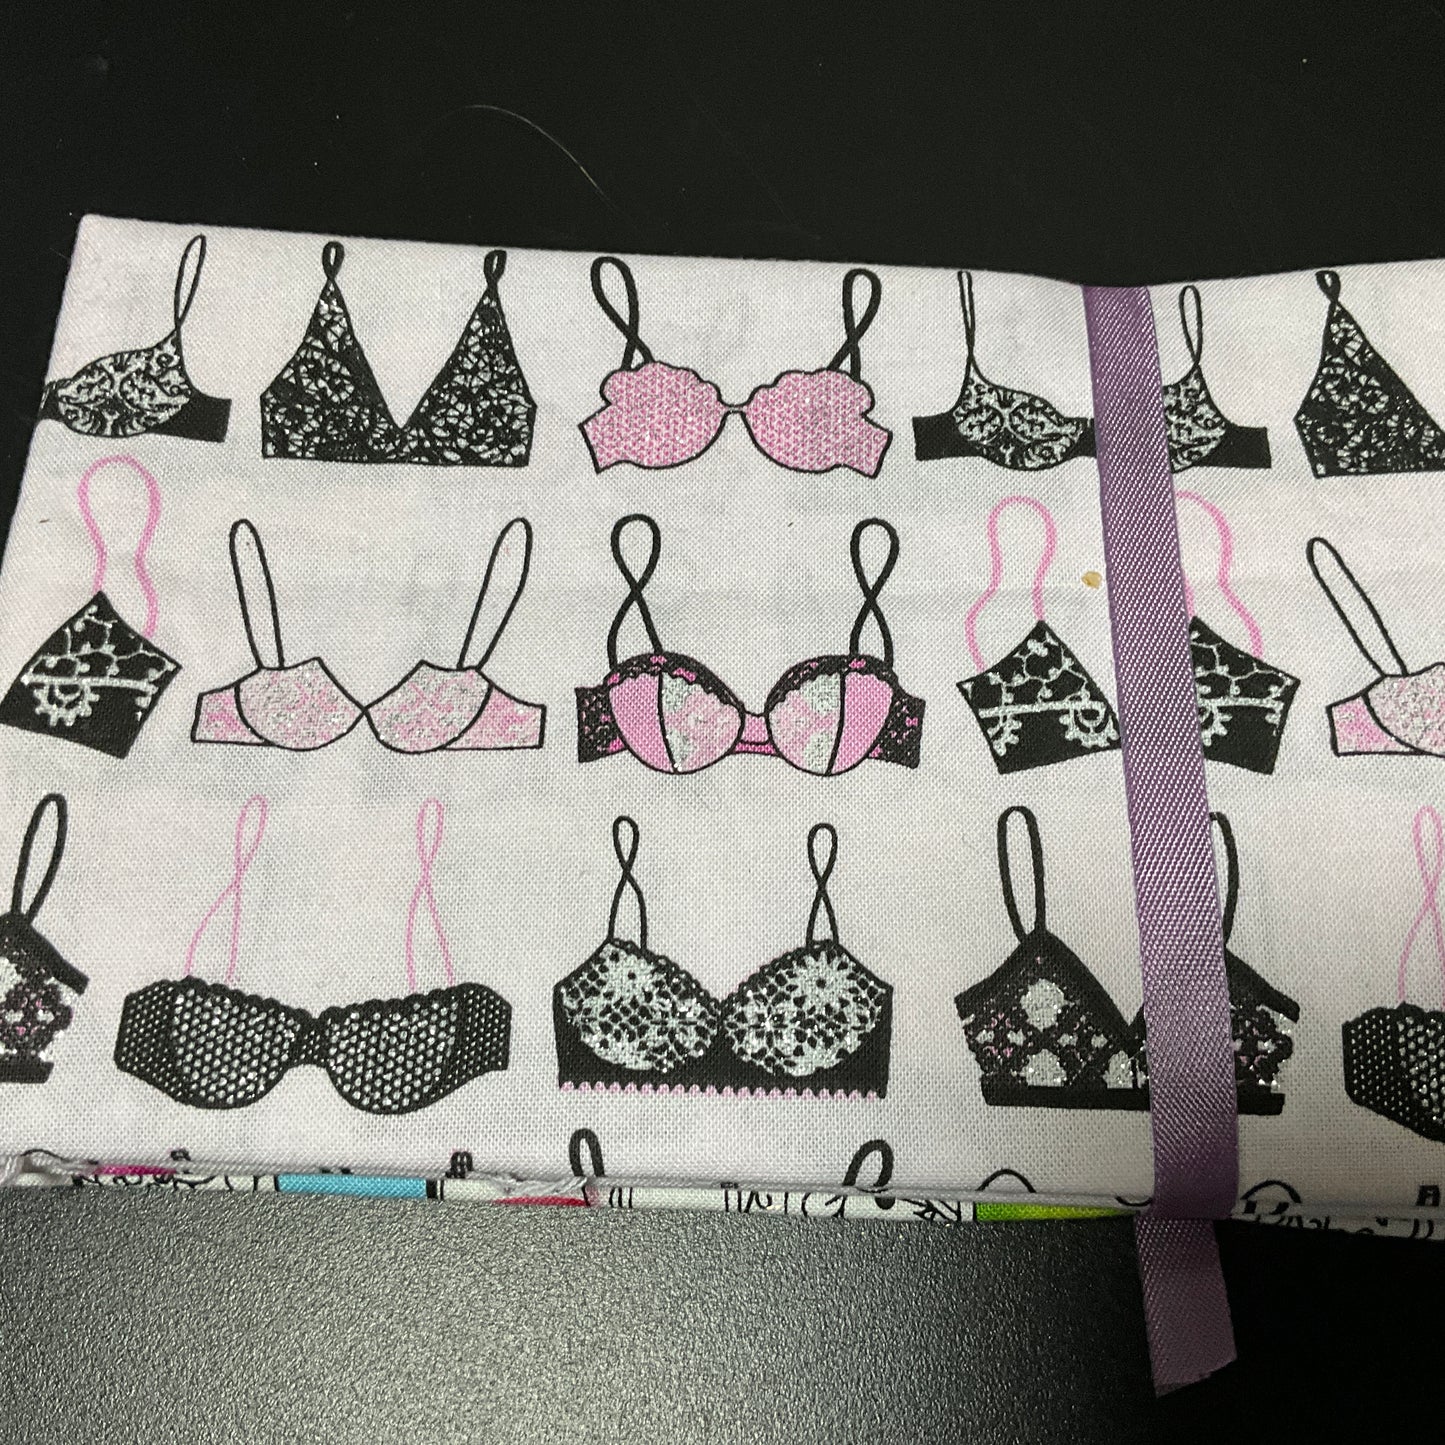 Fun & Fancy fabric Woman, Bra Tops, and purple polka dot .25 yards of each see pictures for details